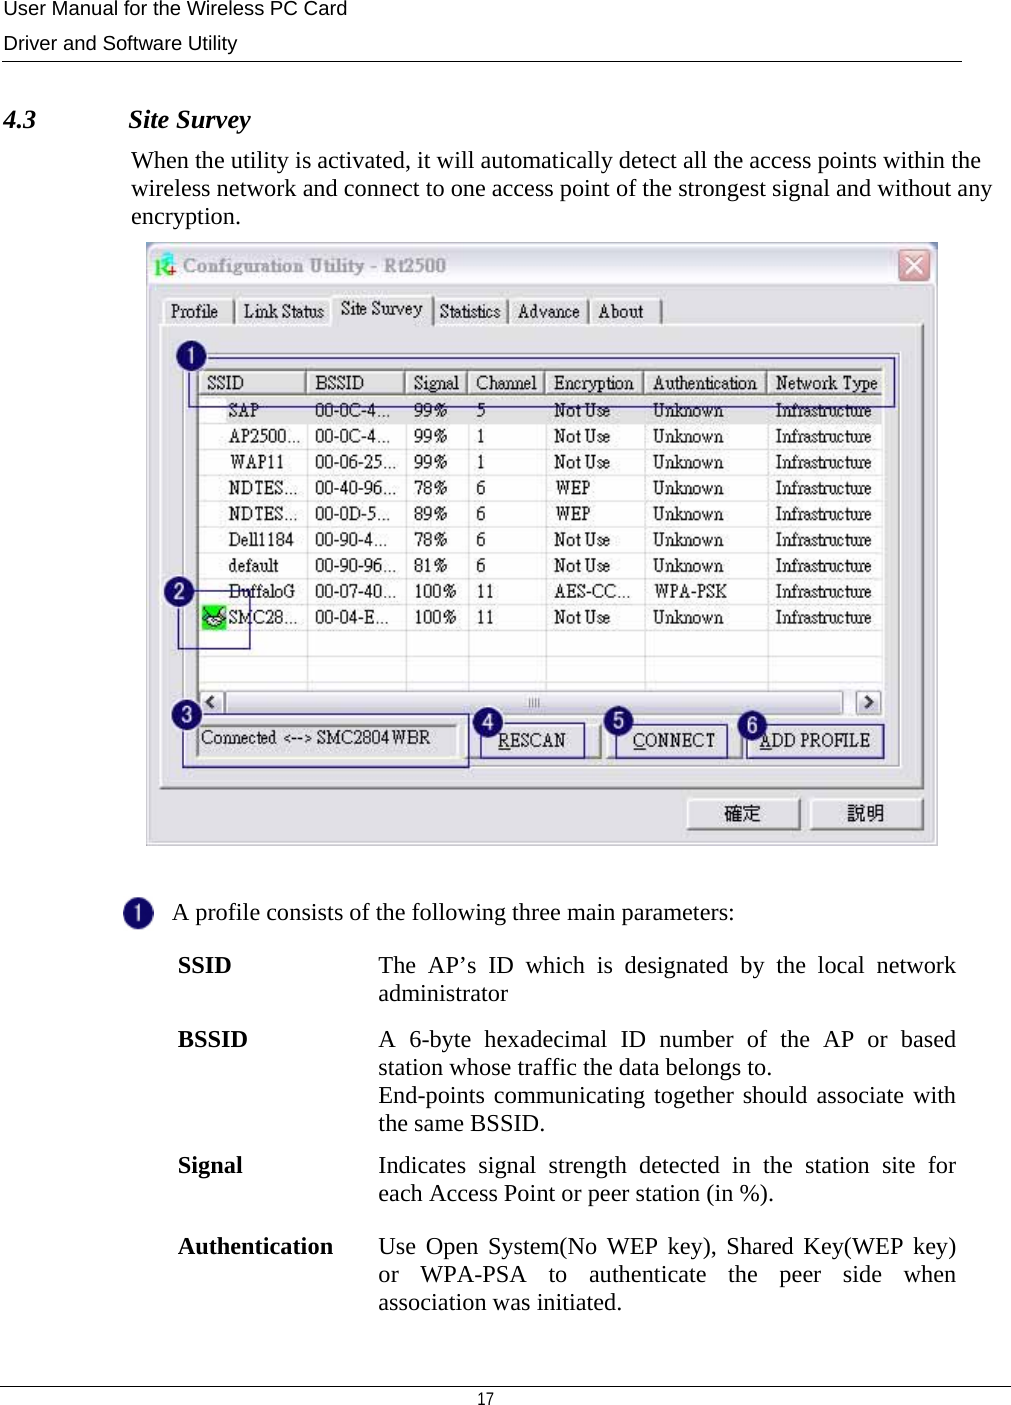 User Manual for the Wireless PC Card Driver and Software Utility   17    4.3              Site Survey When the utility is activated, it will automatically detect all the access points within the wireless network and connect to one access point of the strongest signal and without any encryption.   A profile consists of the following three main parameters:  SSID  The AP’s ID which is designated by the local network administrator  BSSID  A 6-byte hexadecimal ID number of the AP or based station whose traffic the data belongs to. End-points communicating together should associate with the same BSSID.  Signal  Indicates signal strength detected in the station site for each Access Point or peer station (in %).  Authentication Use Open System(No WEP key), Shared Key(WEP key)or WPA-PSA to authenticate the peer side when association was initiated. 